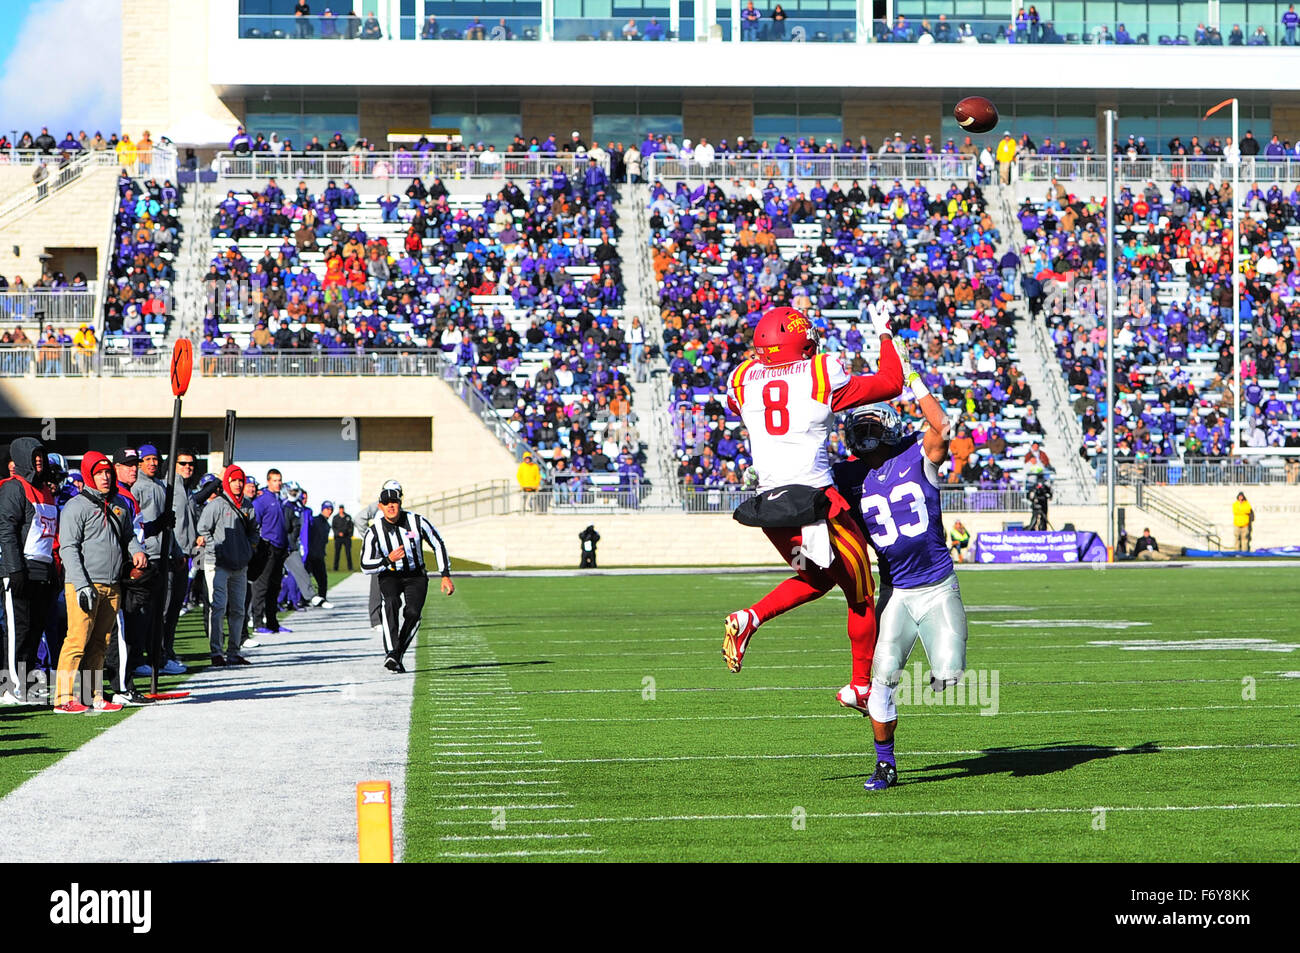 Manhattan, Kansas, USA. 21st Nov, 2015. Iowa State Cyclones wide receiver D'Vario Montgomery (8) goes up over Kansas State Wildcats defensive back Morgan Burns (33) for a second half reception that fell incomplete during the NCAA Football game between the Iowa State Cyclones and the Kansas State Wildcats at Bill Snyder Family Stadium in Manhattan, Kansas. Kendall Shaw/CSM/Alamy Live News Stock Photo